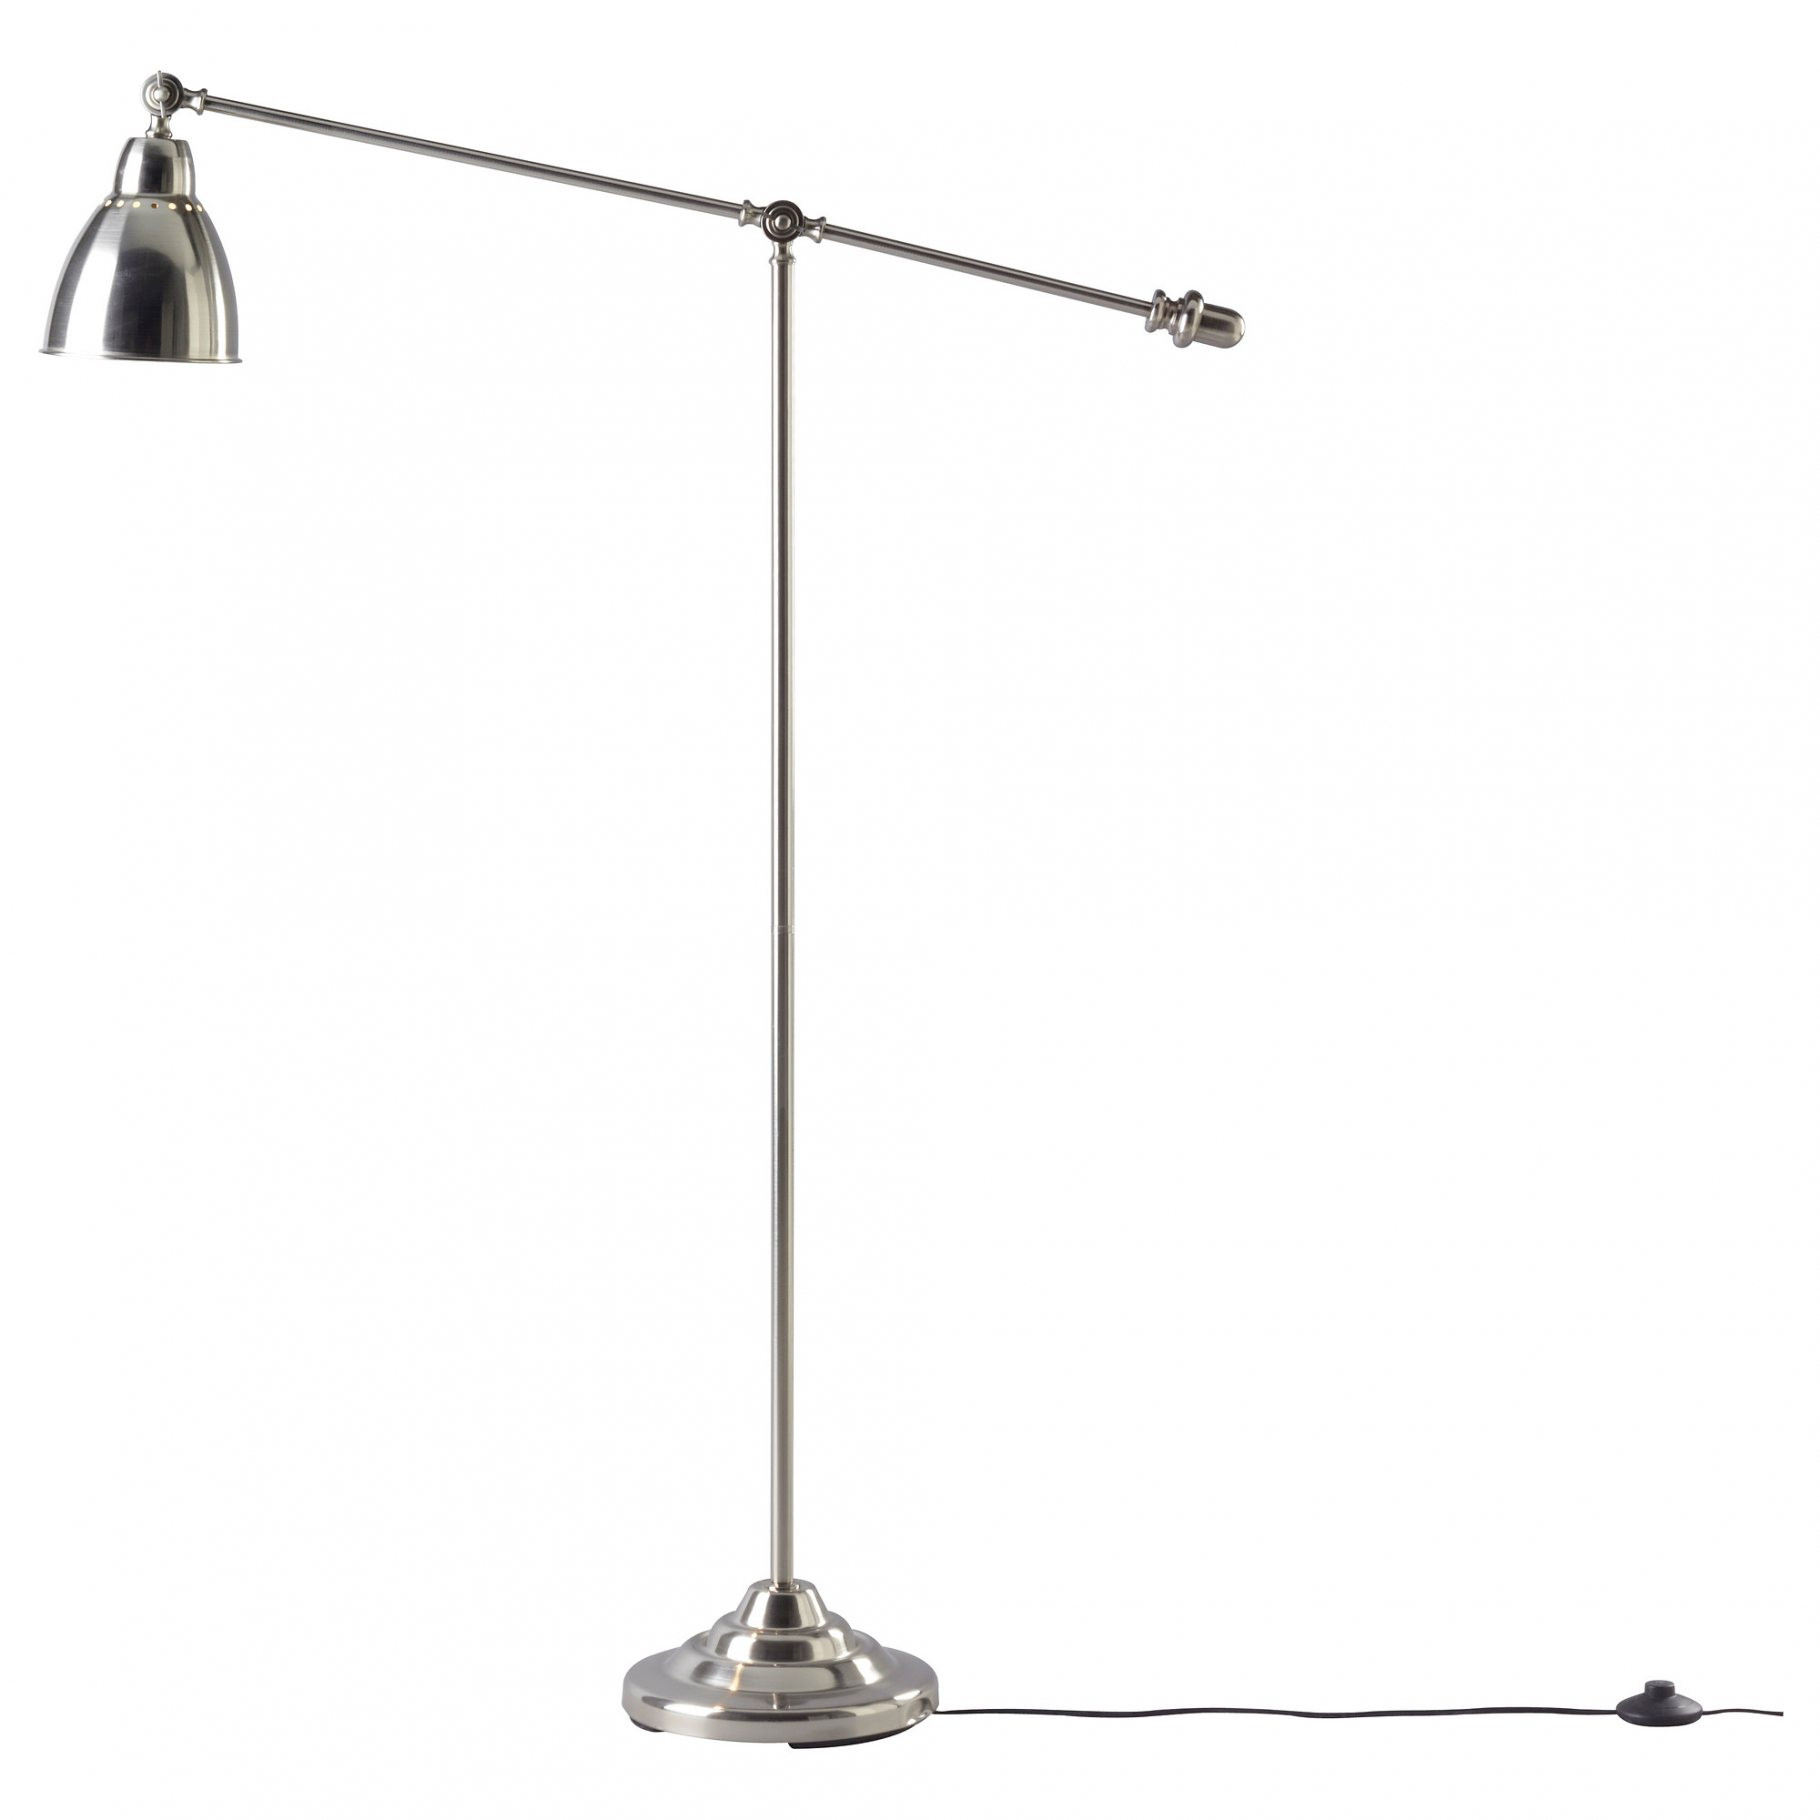 Attractive Reading Floor Lamp Adjustable Awesome Lerstum throughout size 1820 X 1820